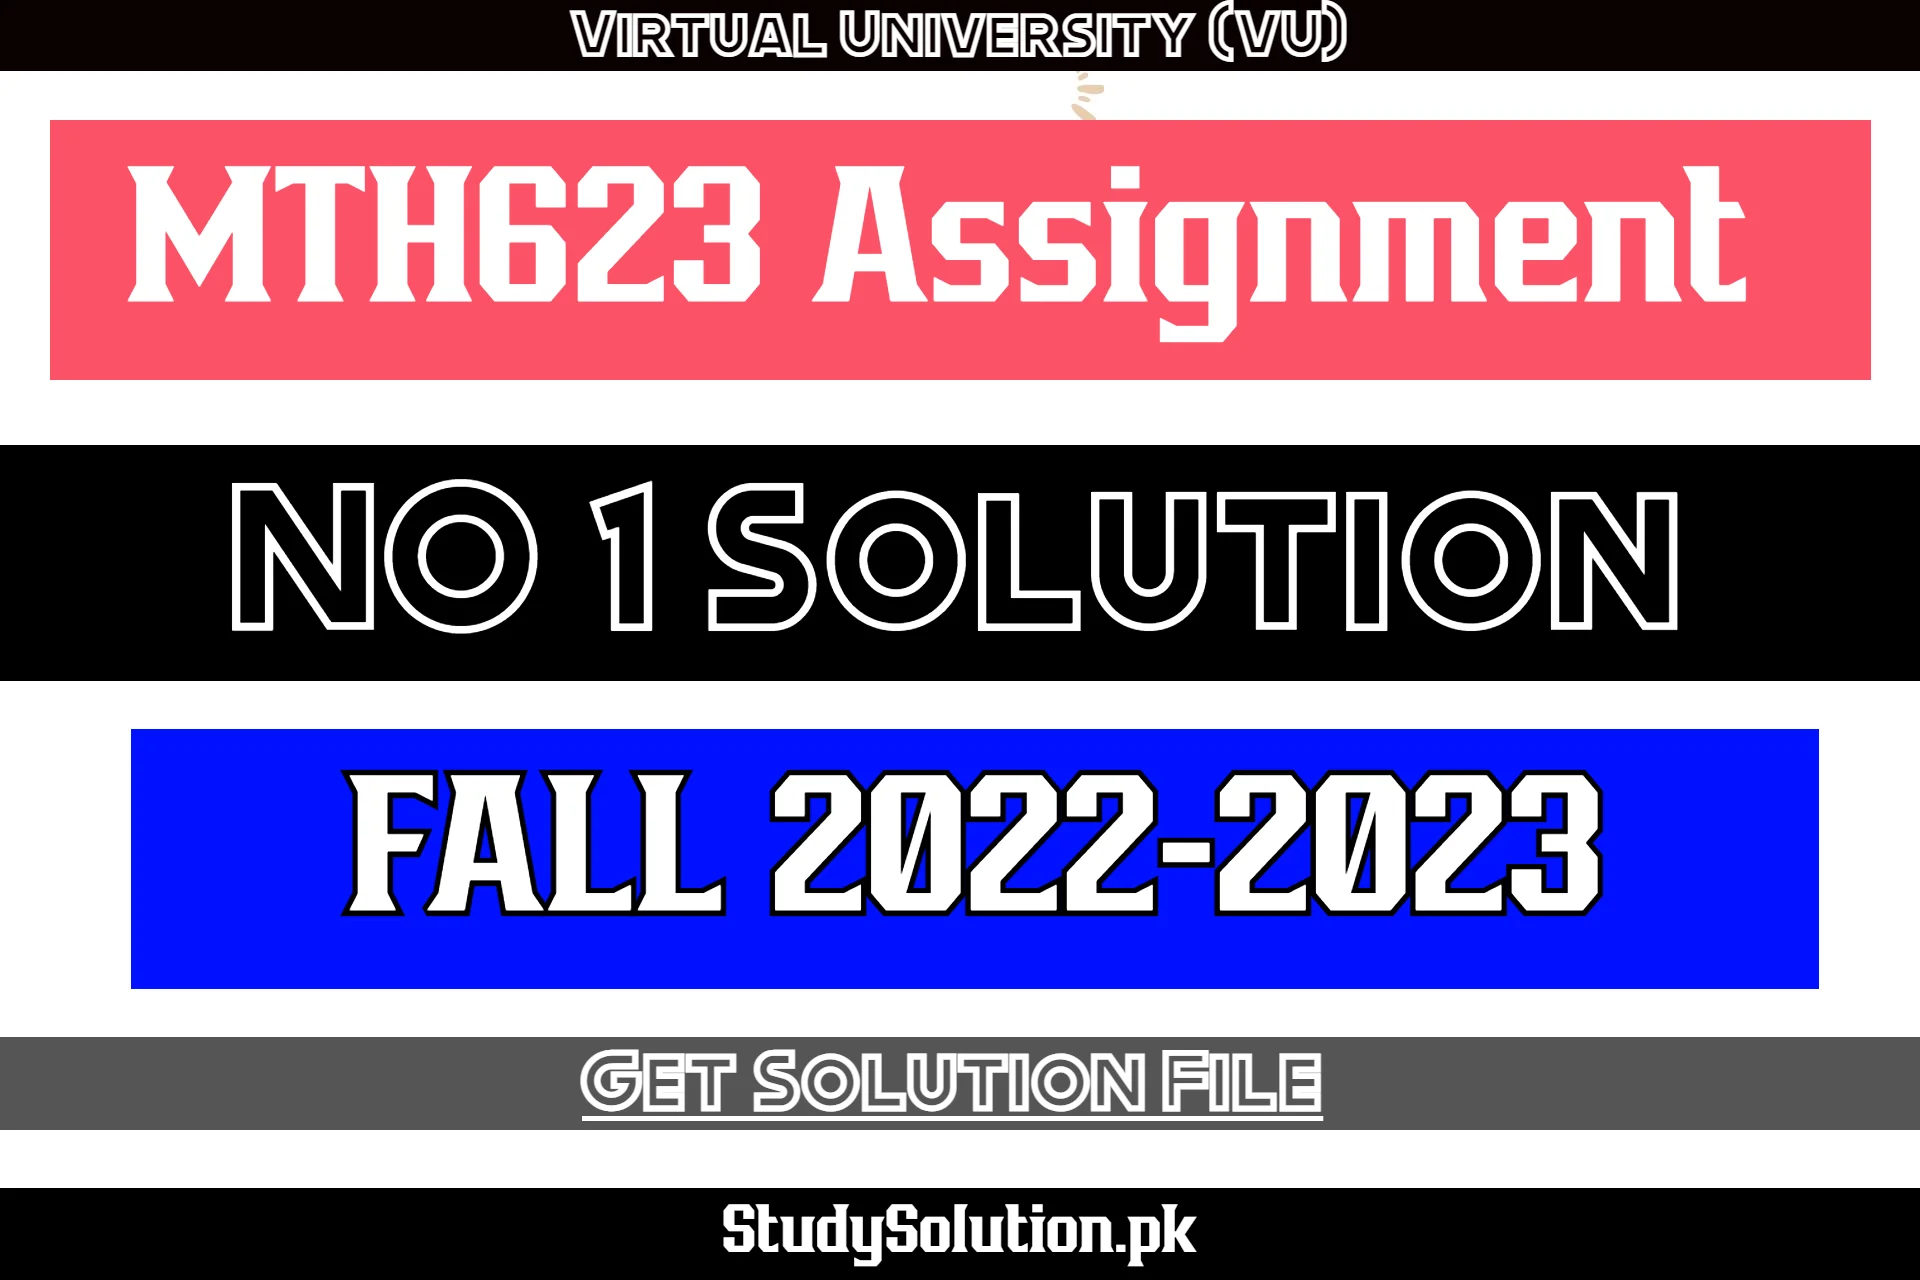 MTH623 Assignment No 1 Solution Fall 2022